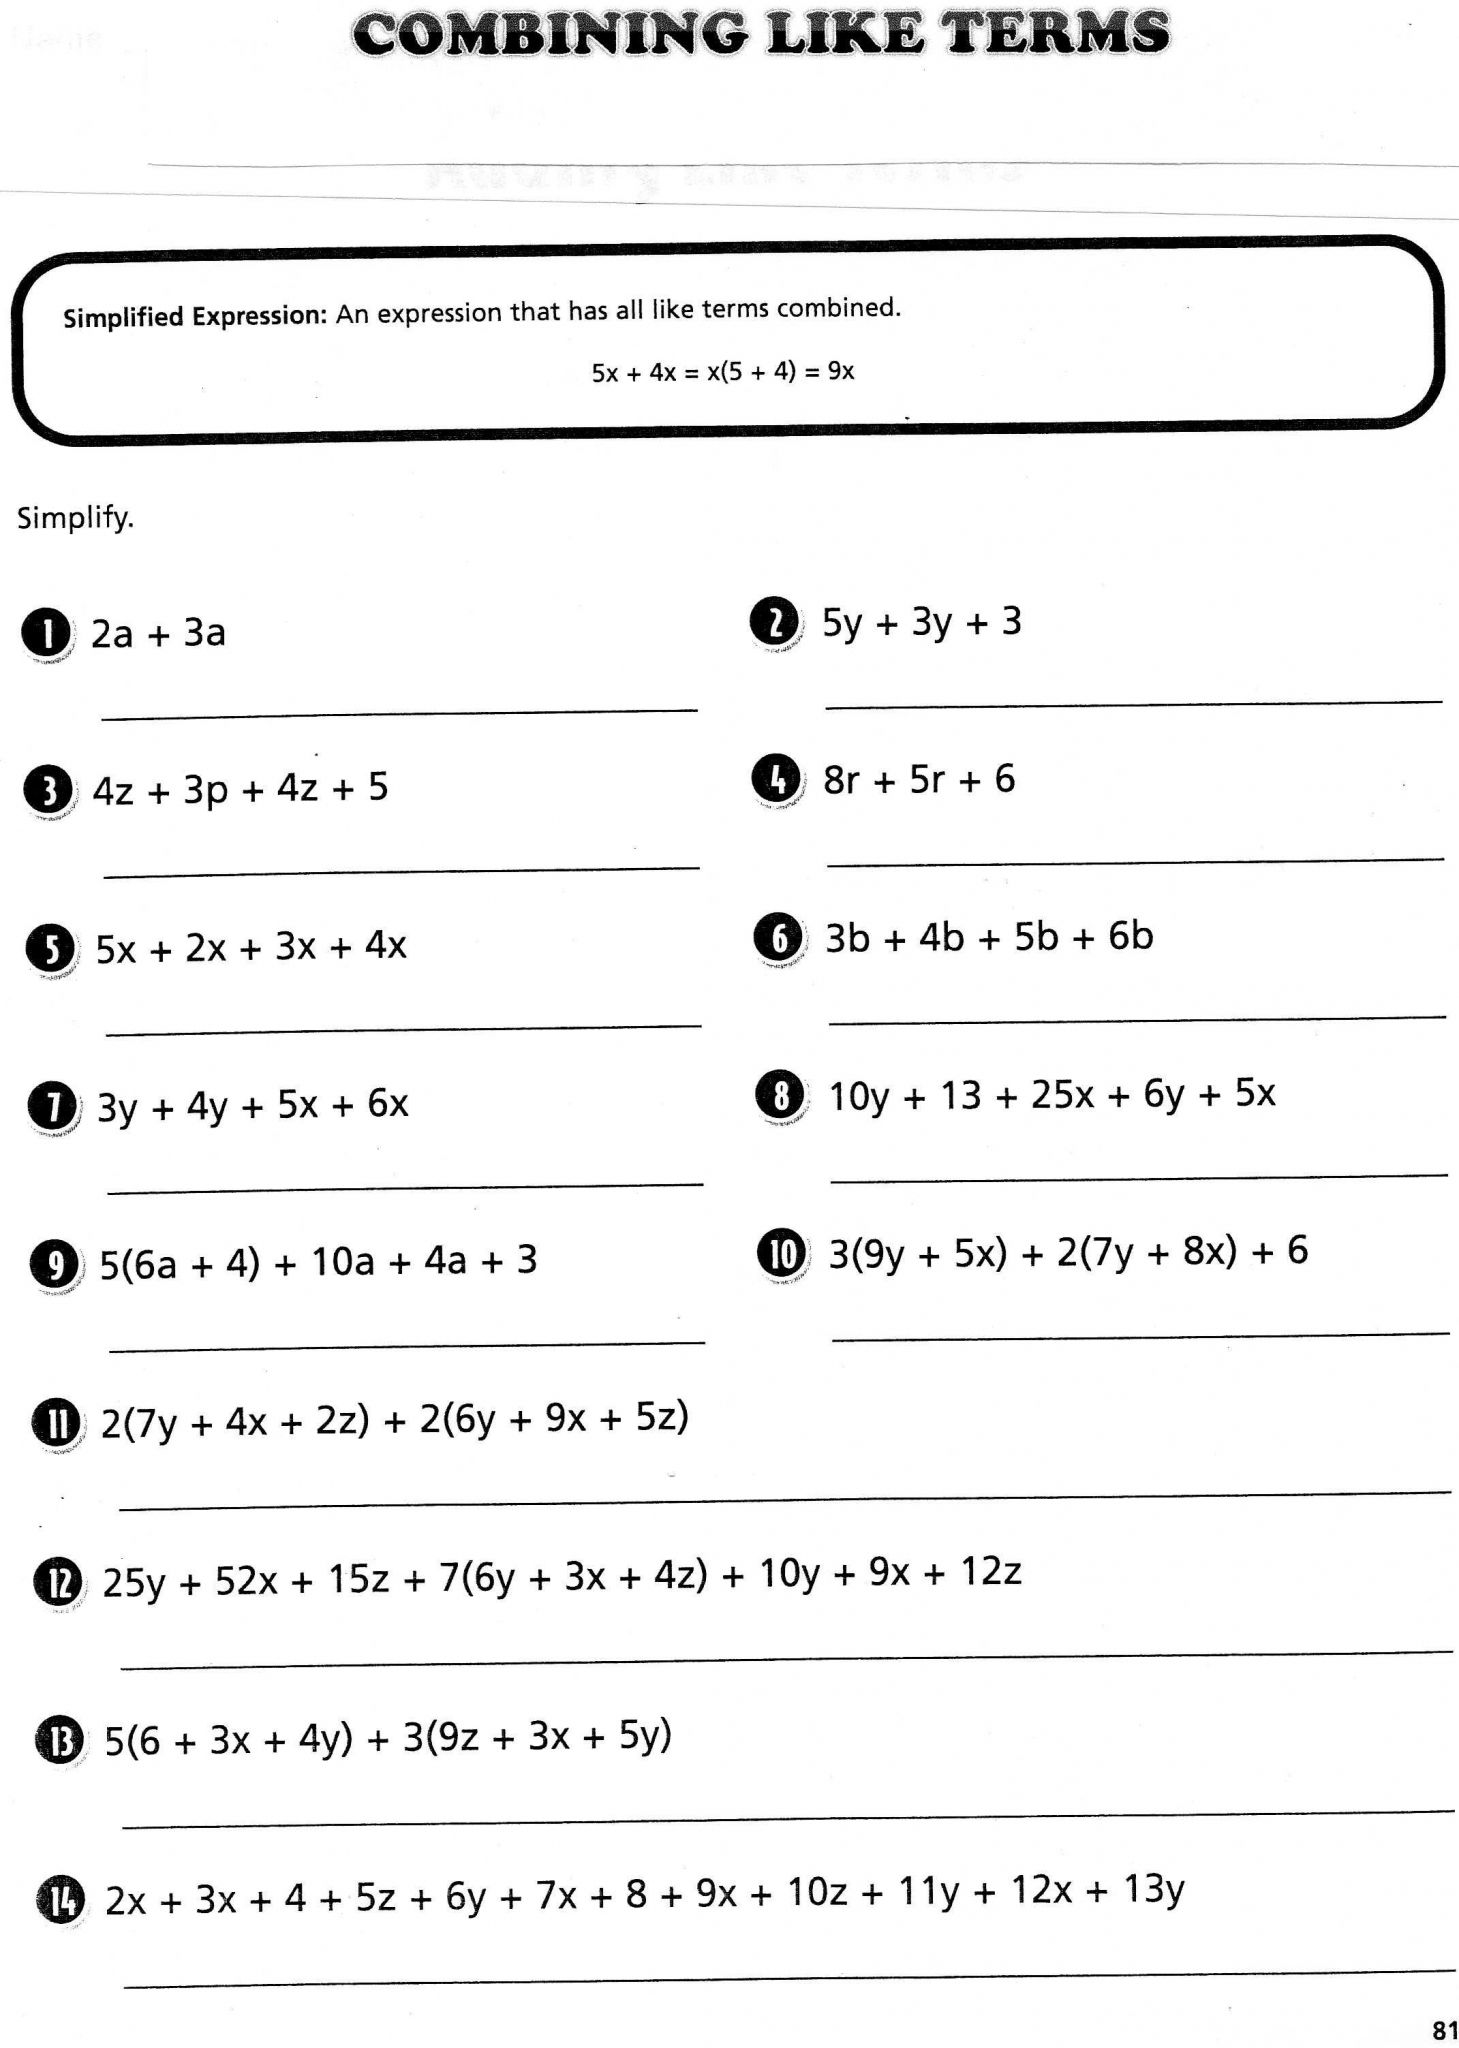 Contagion Worksheet Answers as Well as Free Math Worksheets for 6th Grade with Answers Gallery Worksheet